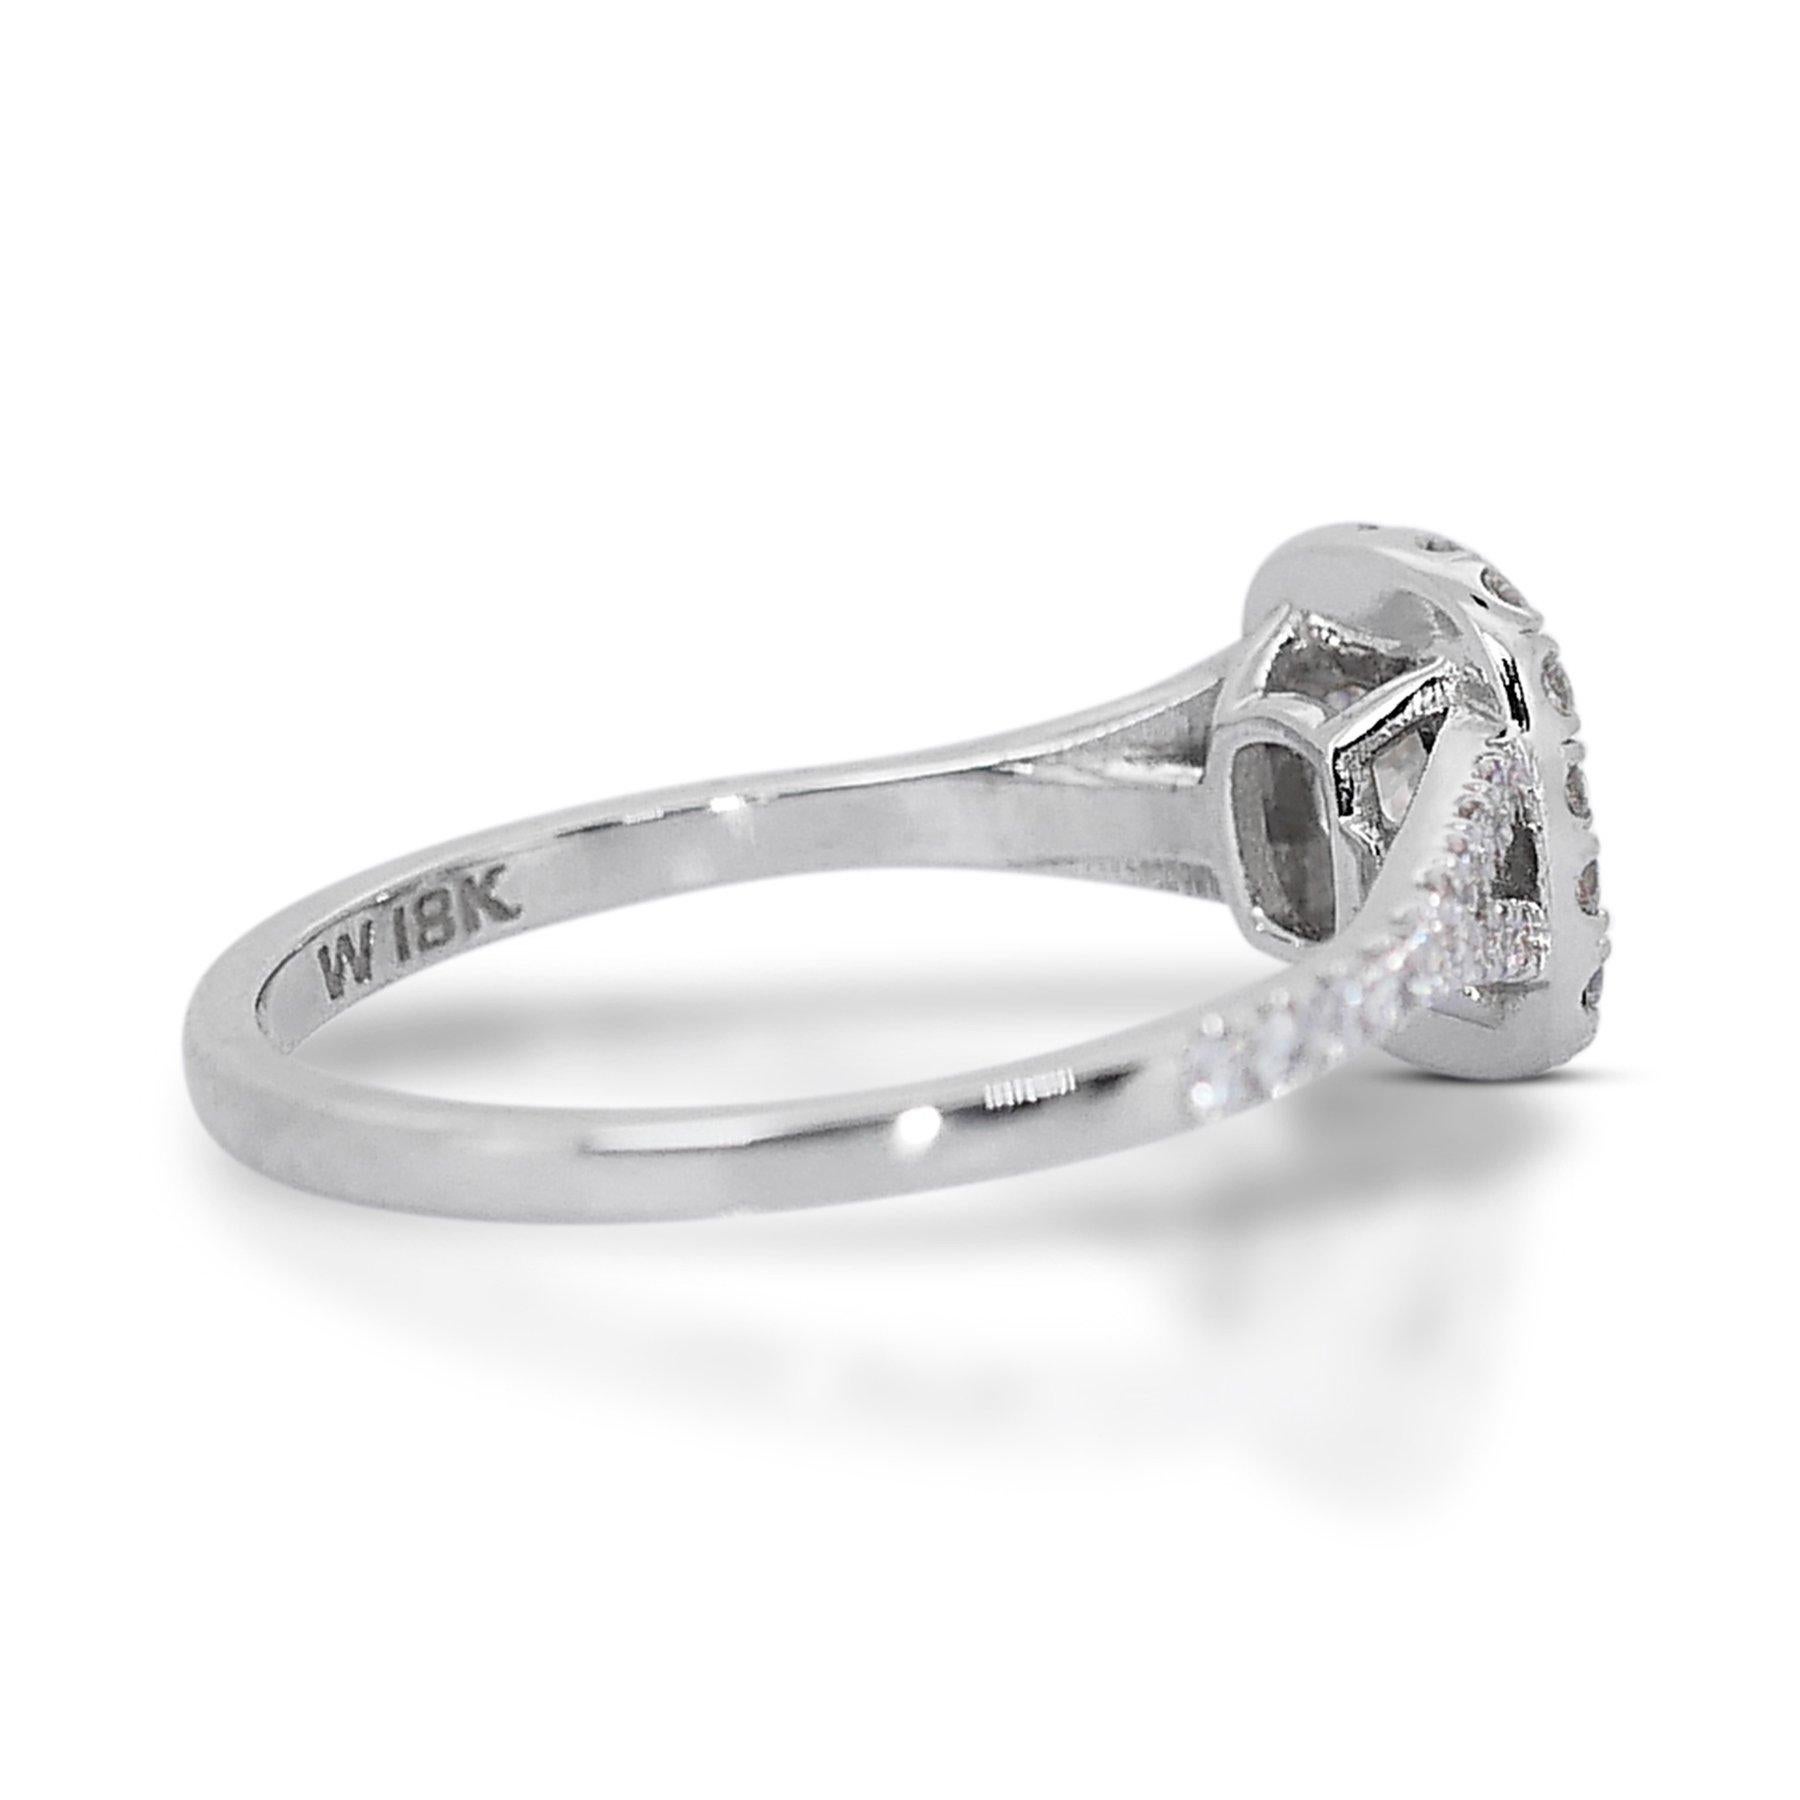 Elegant 1.40ct Cushion-Cut Diamond Halo Ring in 18k White Gold - GIA Certified For Sale 1